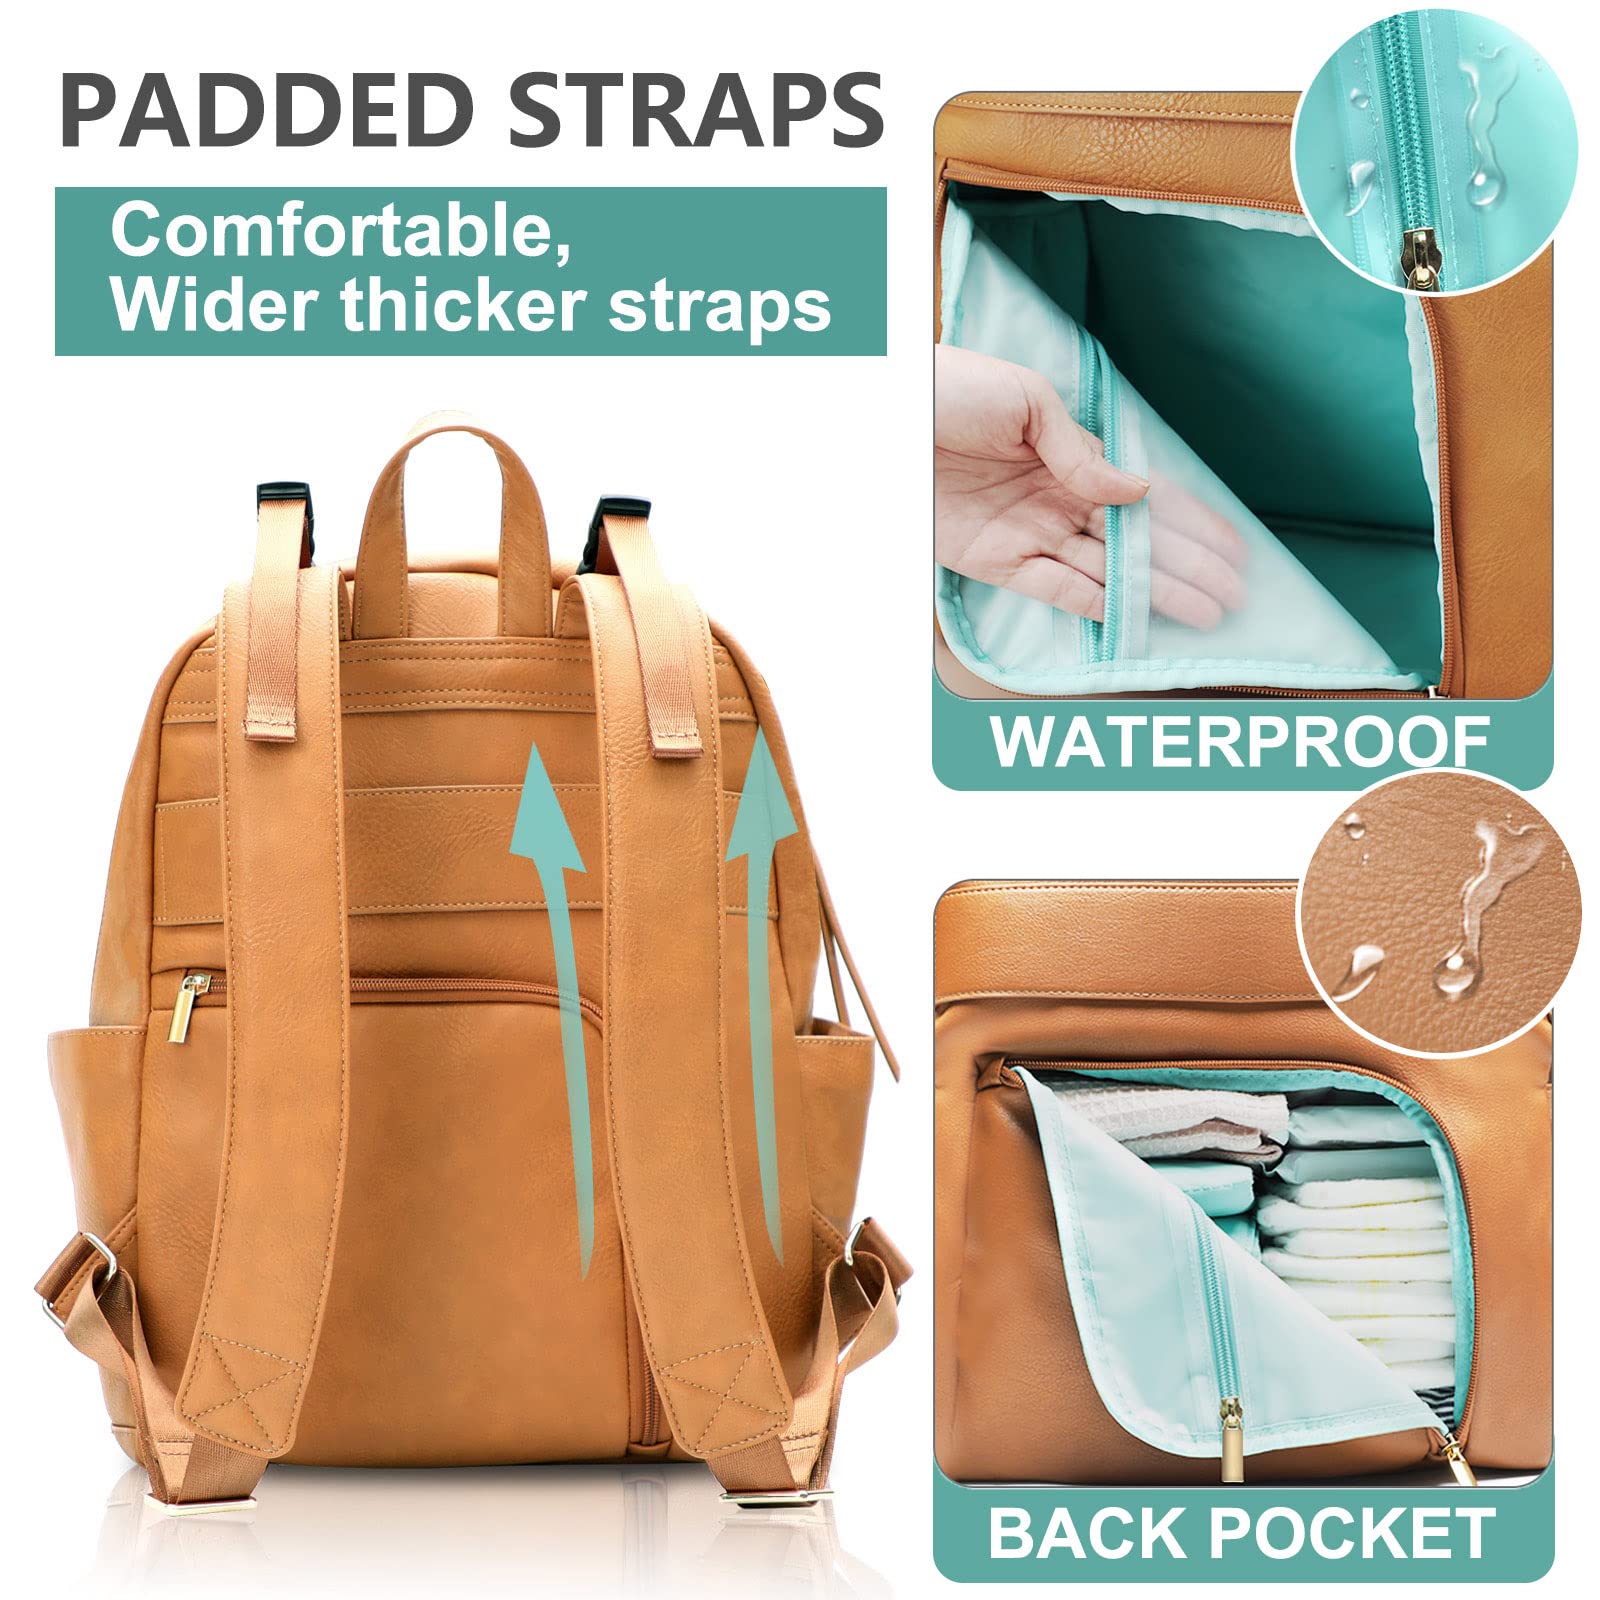 MOMINSIDE Diaper Bag Backpack, Small Diaper Bag Tote, Leather Baby Bag with 6 Insulated Pockets for Mom Dad, Baby Registry Search, Changing Station, Stroller Straps, Large Capacity